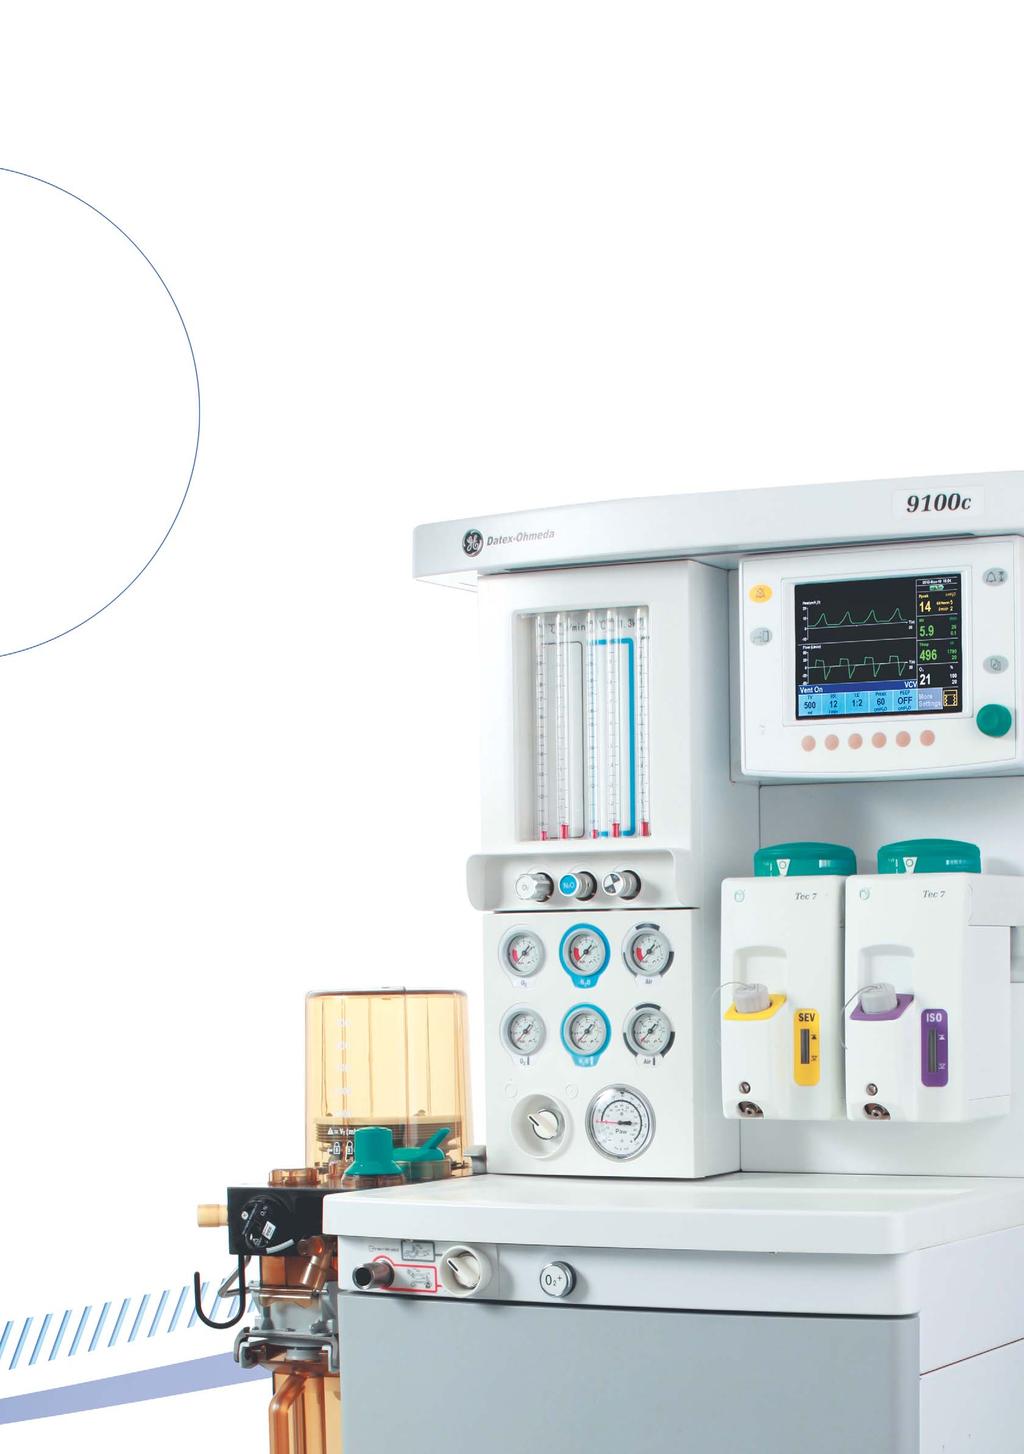 The know-how of a leader 9100c The 9100c is the ideal solution for customers seeking an affordable, reliable and easy-to-use anaesthesia system.